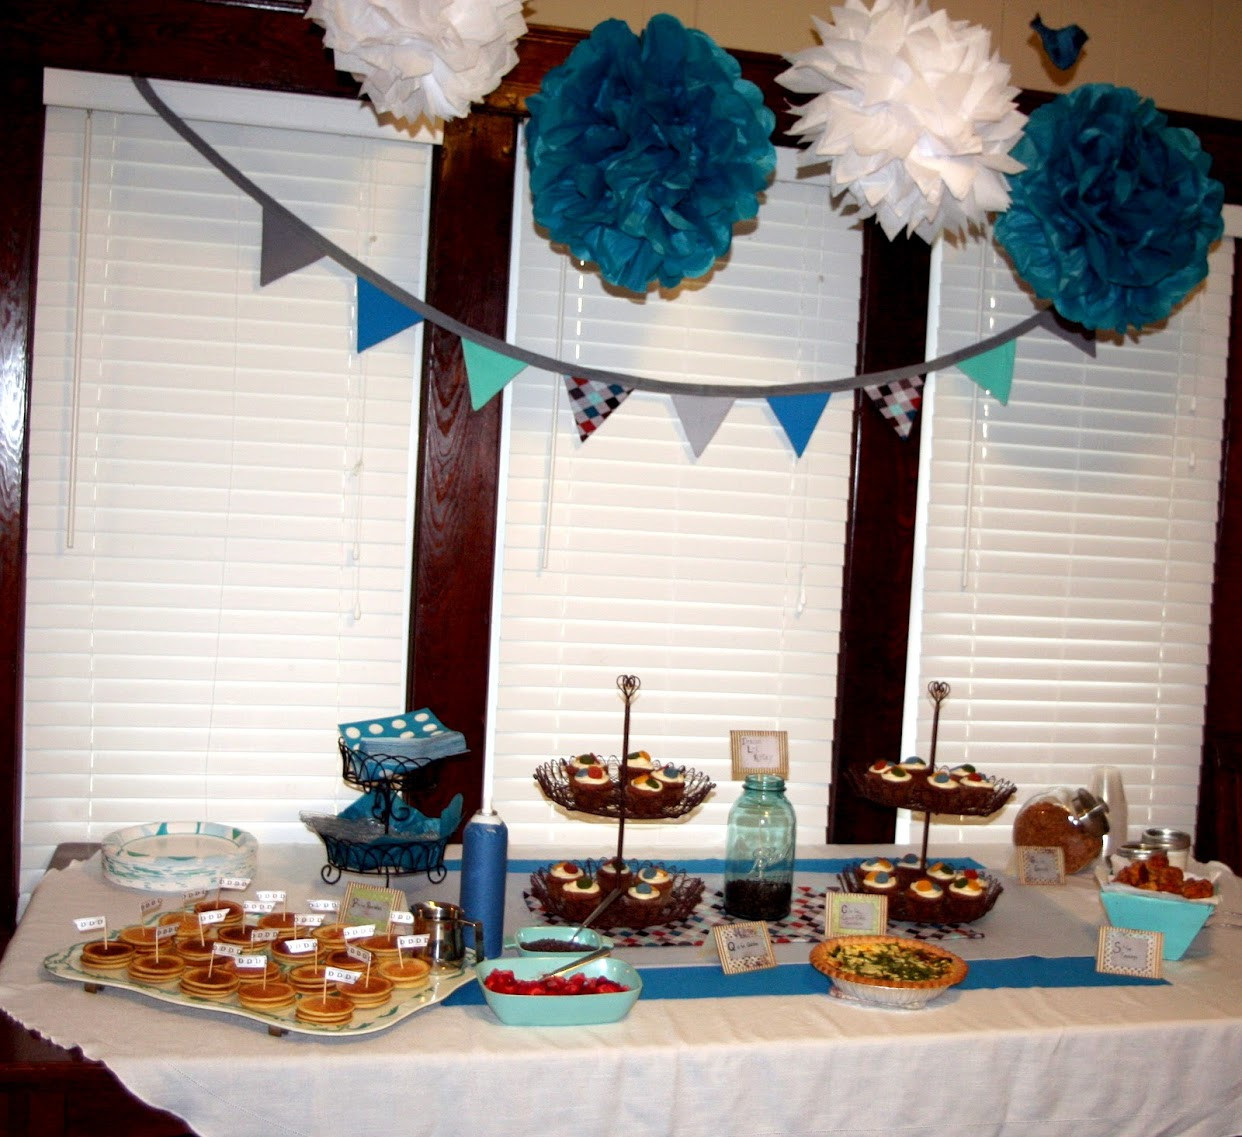 Baby Shower Decorations Ideas For A Boy
 Baby Shower Decorations For Boys Ideas